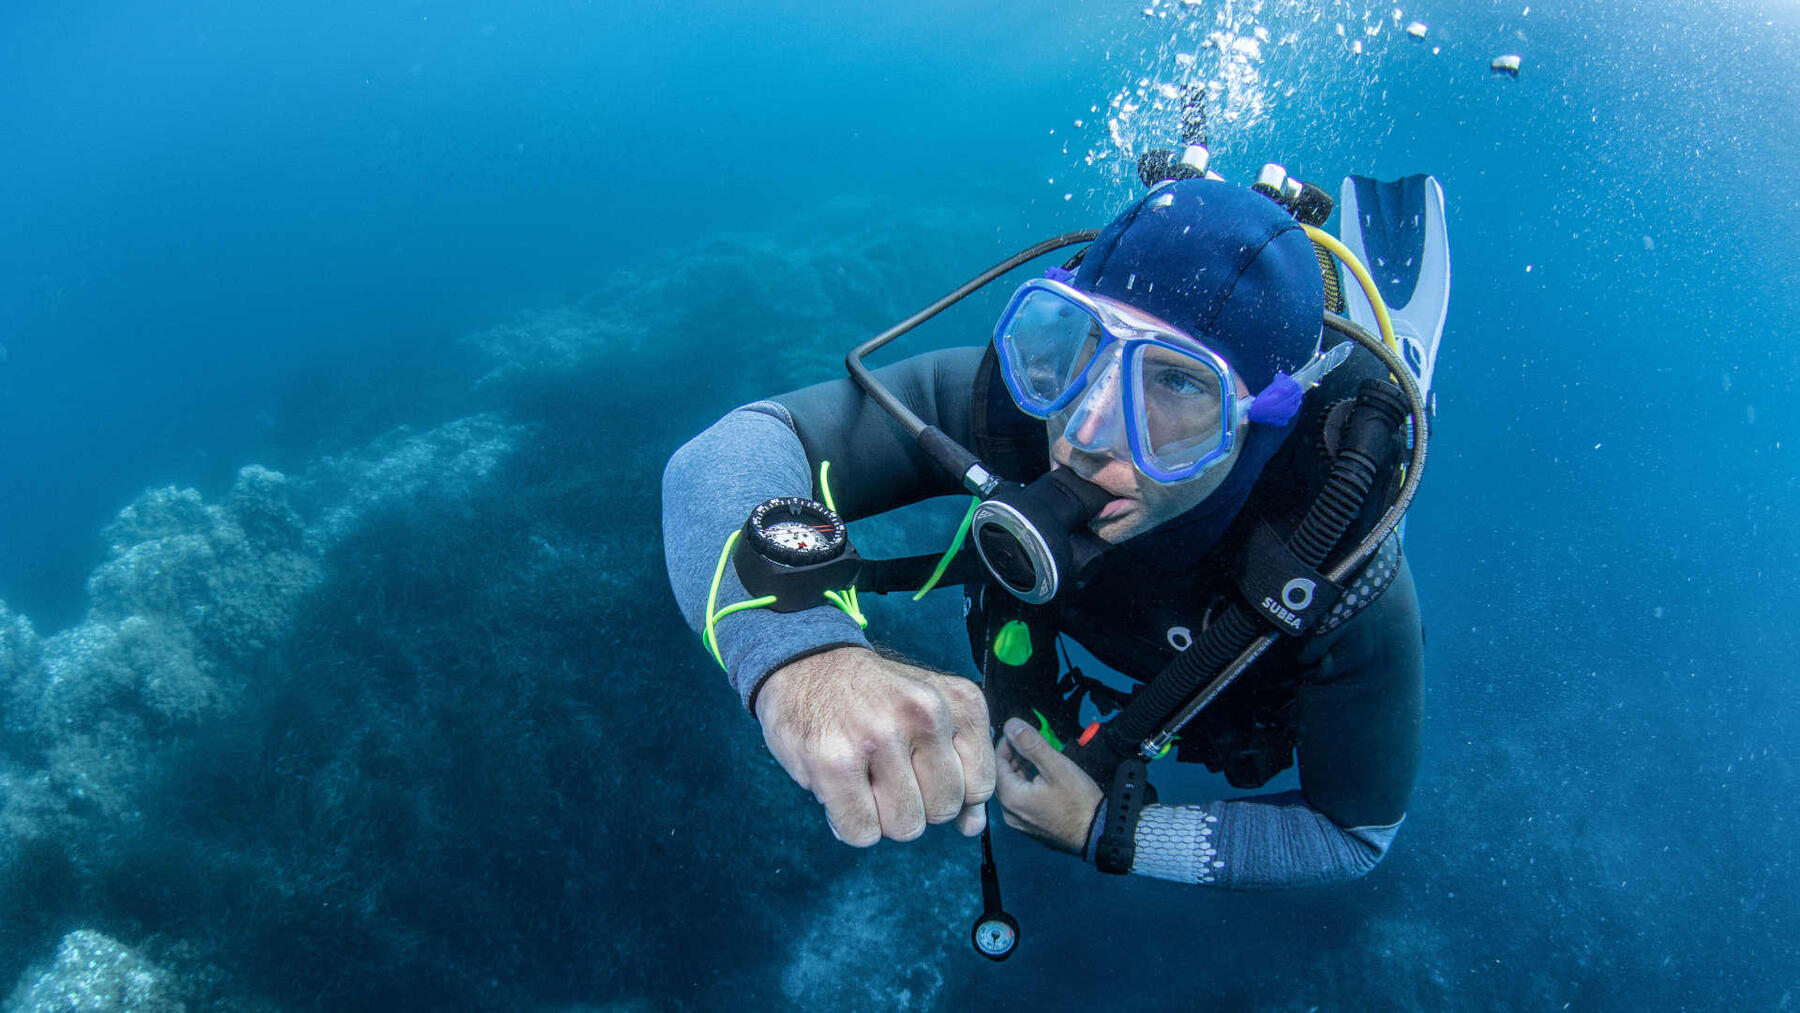 Diving| safety tips for divers and snorkelers